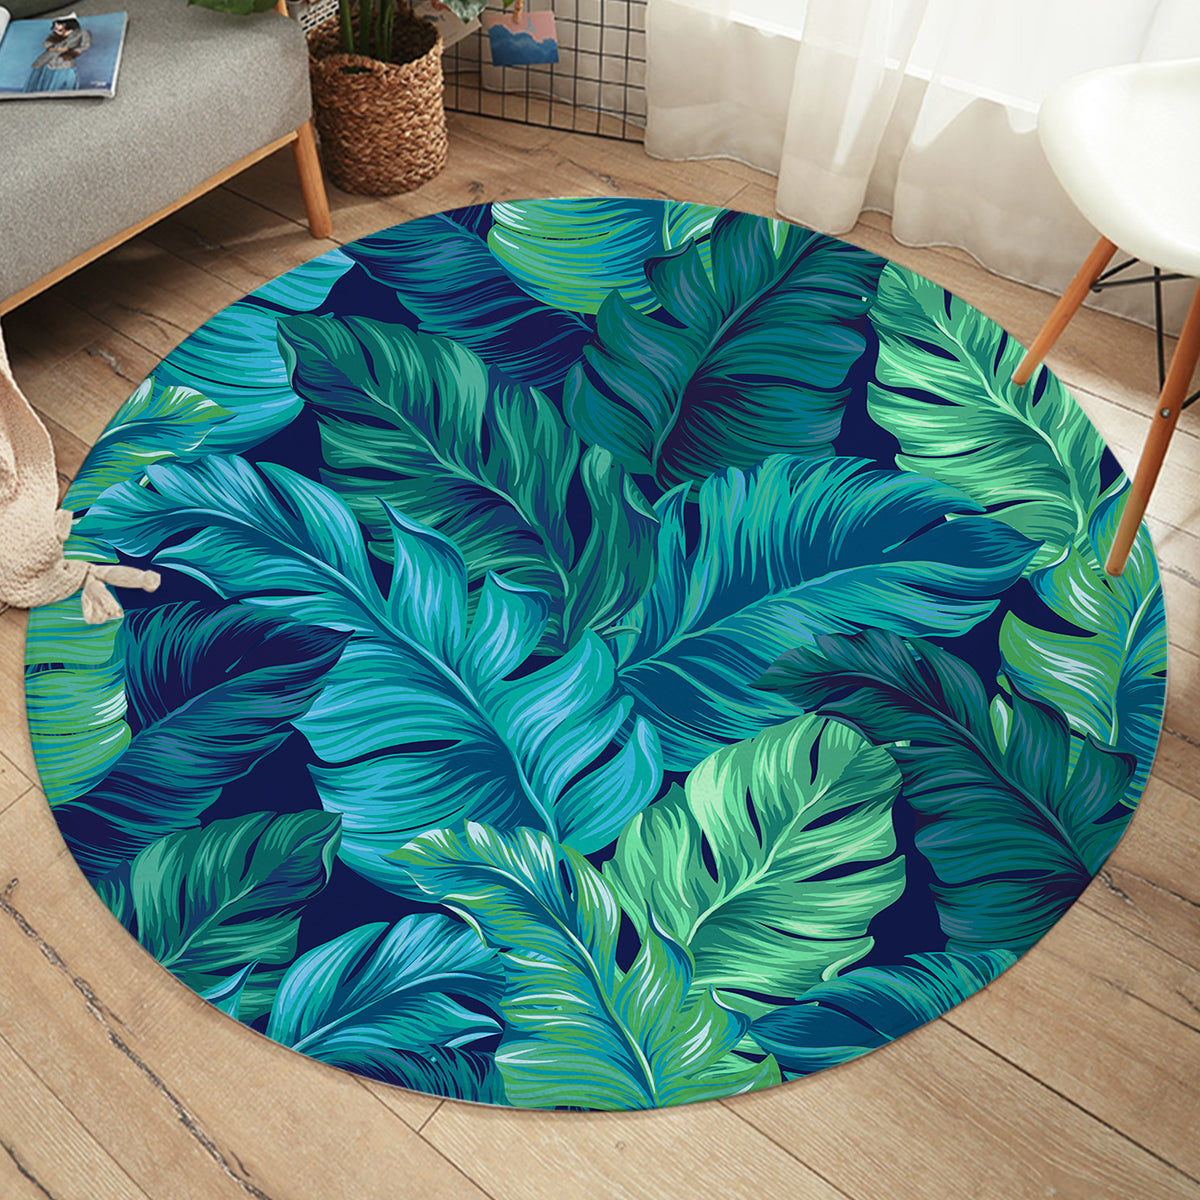 Tropical Leaves Round Area Rug